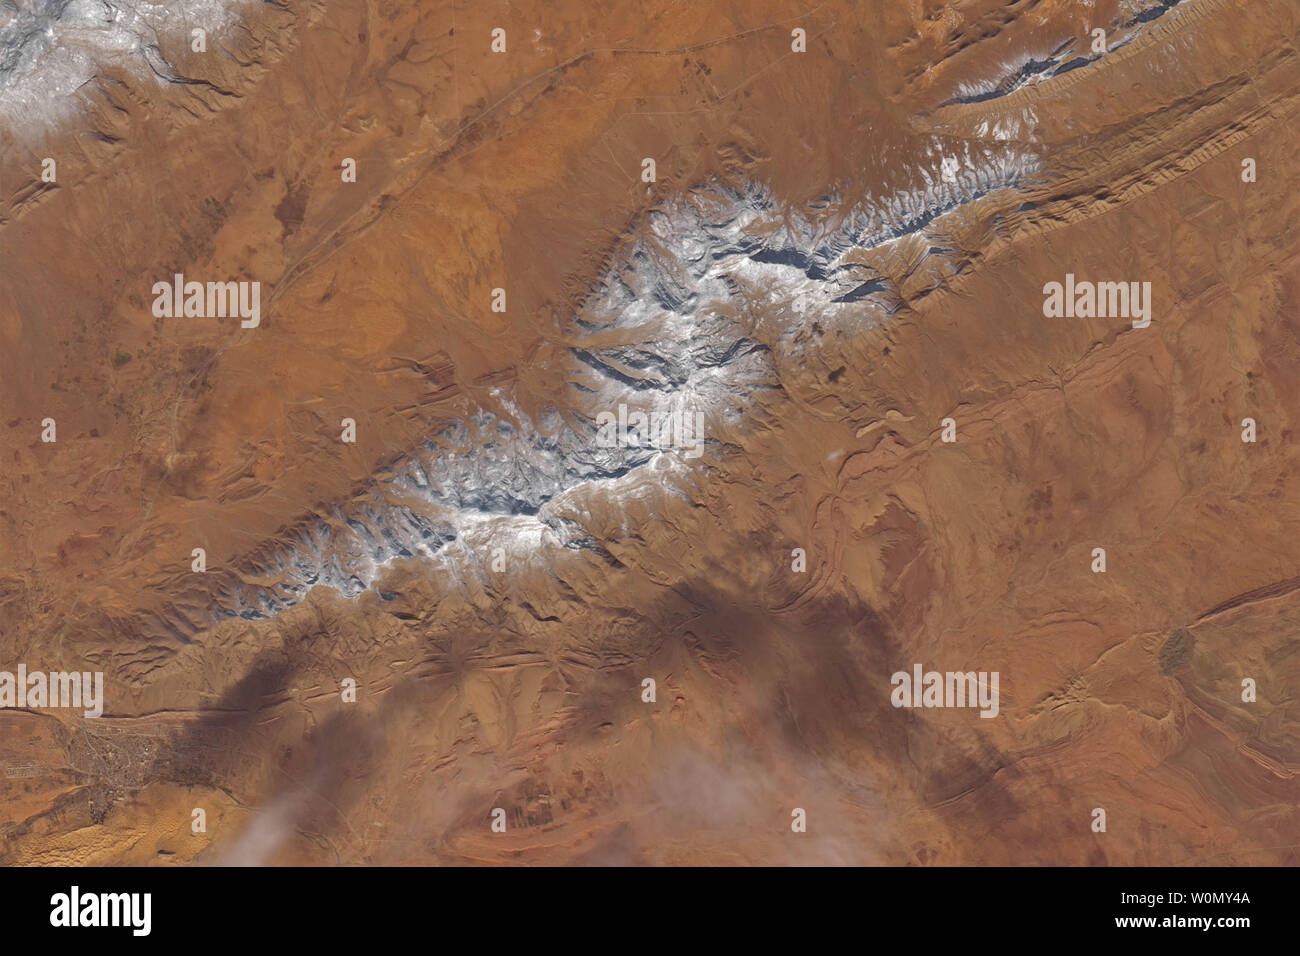 For the second time in three years, snow has accumulated in the desert near the northern Algerian town of Ain Sefra. Sometimes called the 'gateway to the desert,' the town of 35,000 people sits between the Sahara and the Atlas Mountains. On January 8, 2018, Landsat 8 captured data for these natural-color images of the snow in the Sahara. According to news and social media accounts, anywhere from 4 to 12 inches of snow accumulated on January 8 on some higher desert elevations (1000 meters or more above sea level). Snow in the Sahara and other parts of North Africa is infrequent, but not unprece Stock Photo